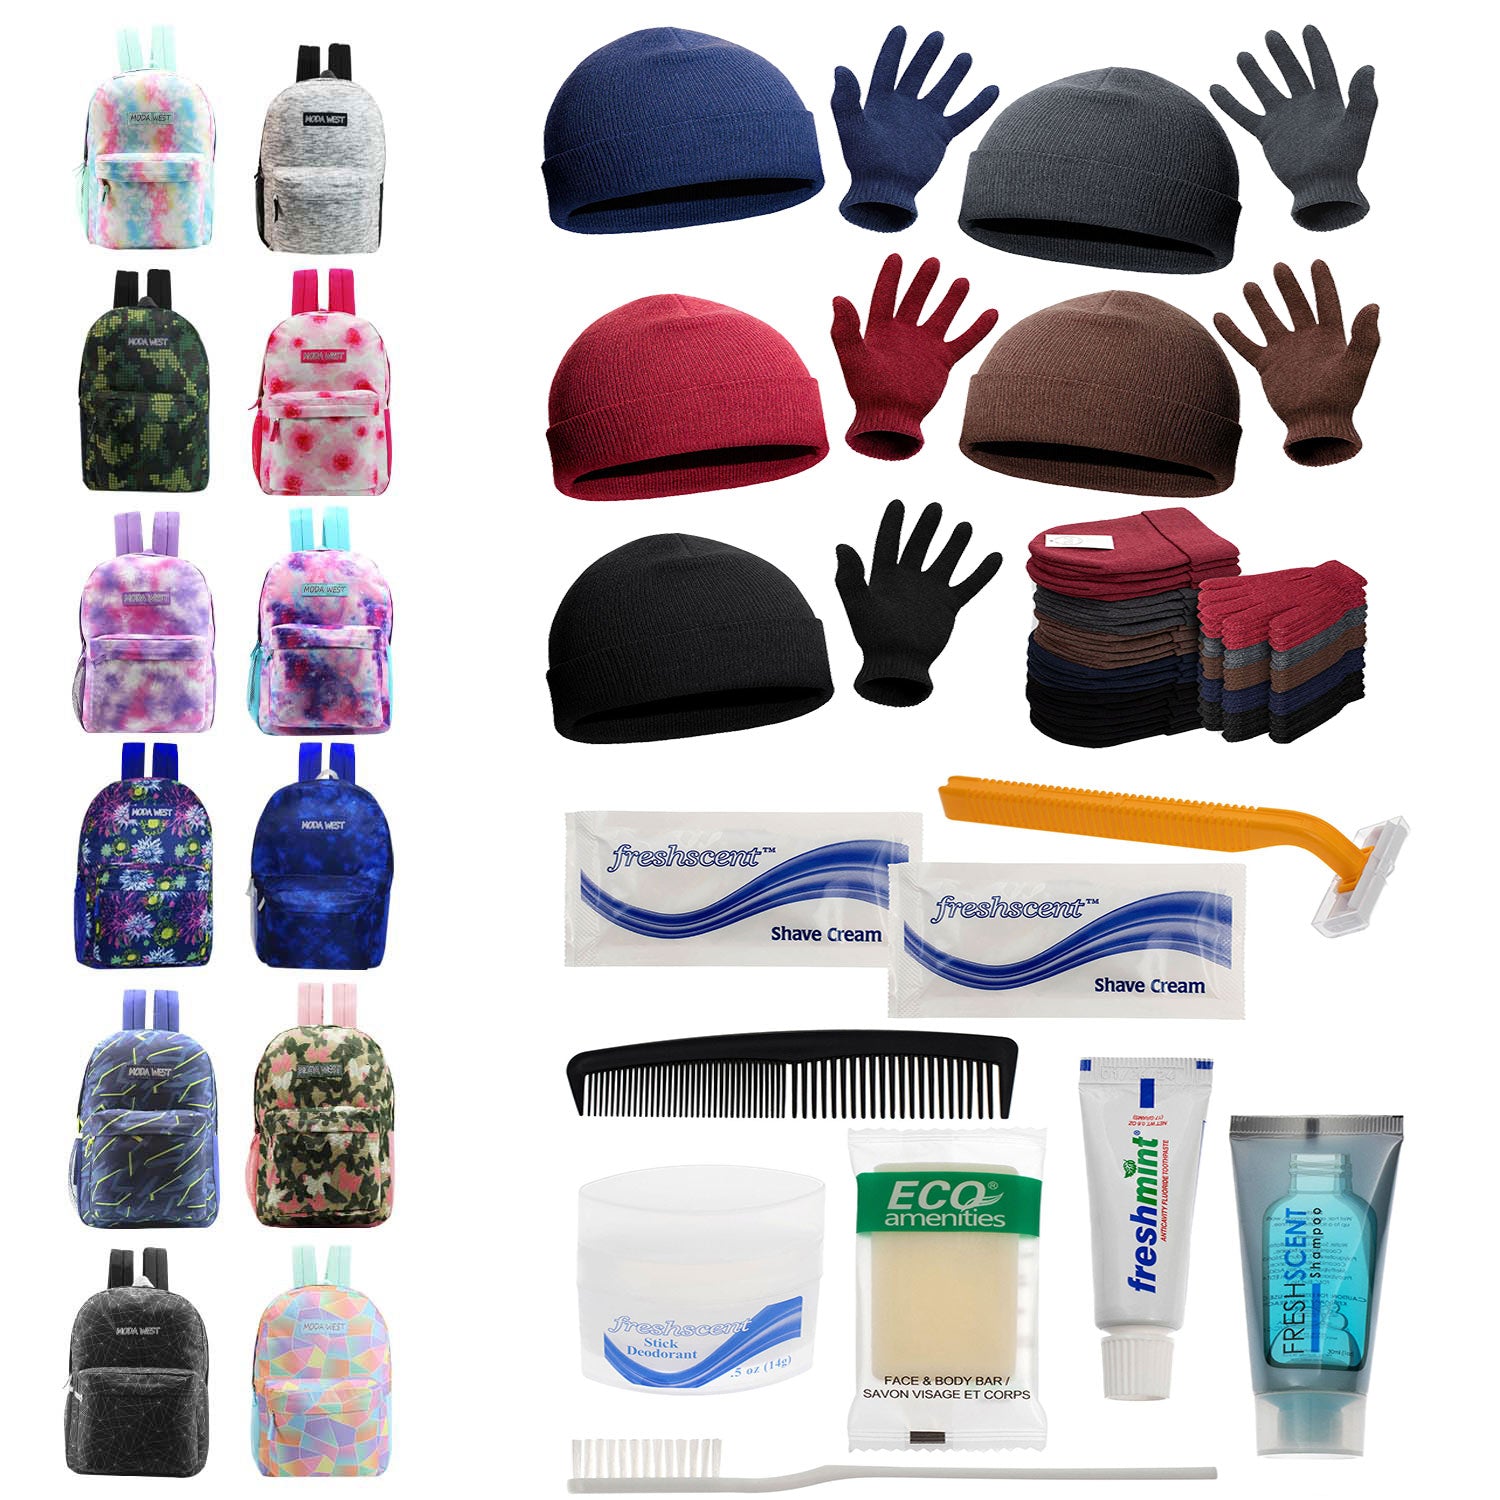 Bulk Case of 12 Backpacks and 12 Winter Item Sets and 12 Hygiene Kits - Wholesale Care Package - Emergencies, Homeless, Charity